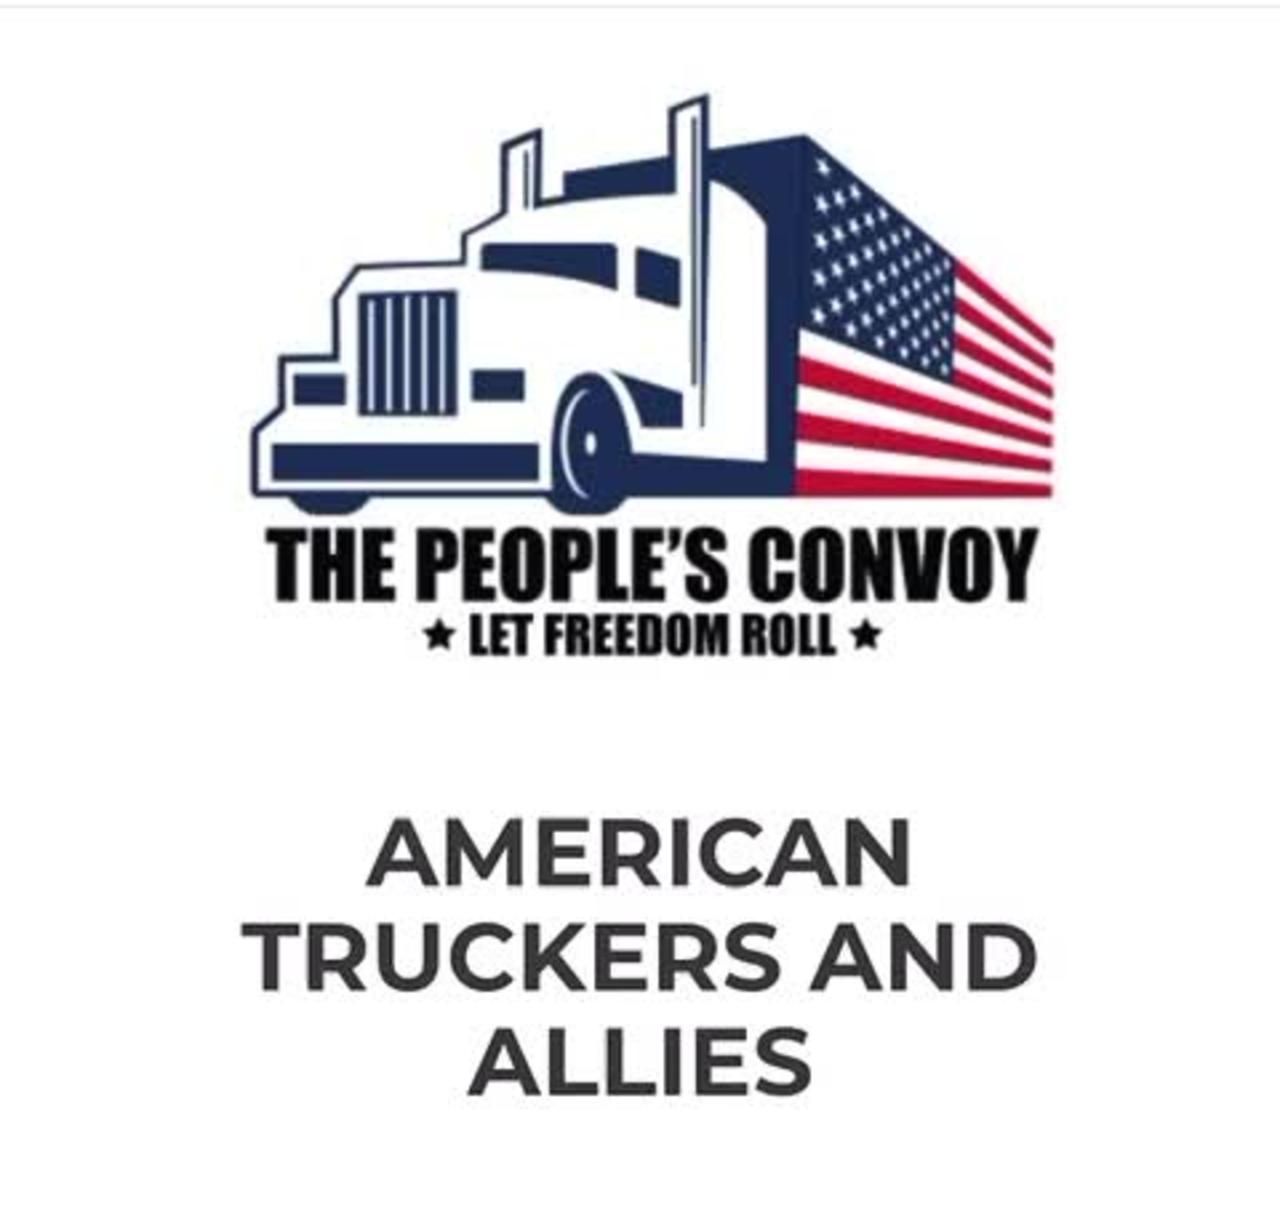 Live - The Peoples Convoy - Post Falls Idaho Morning Meeting